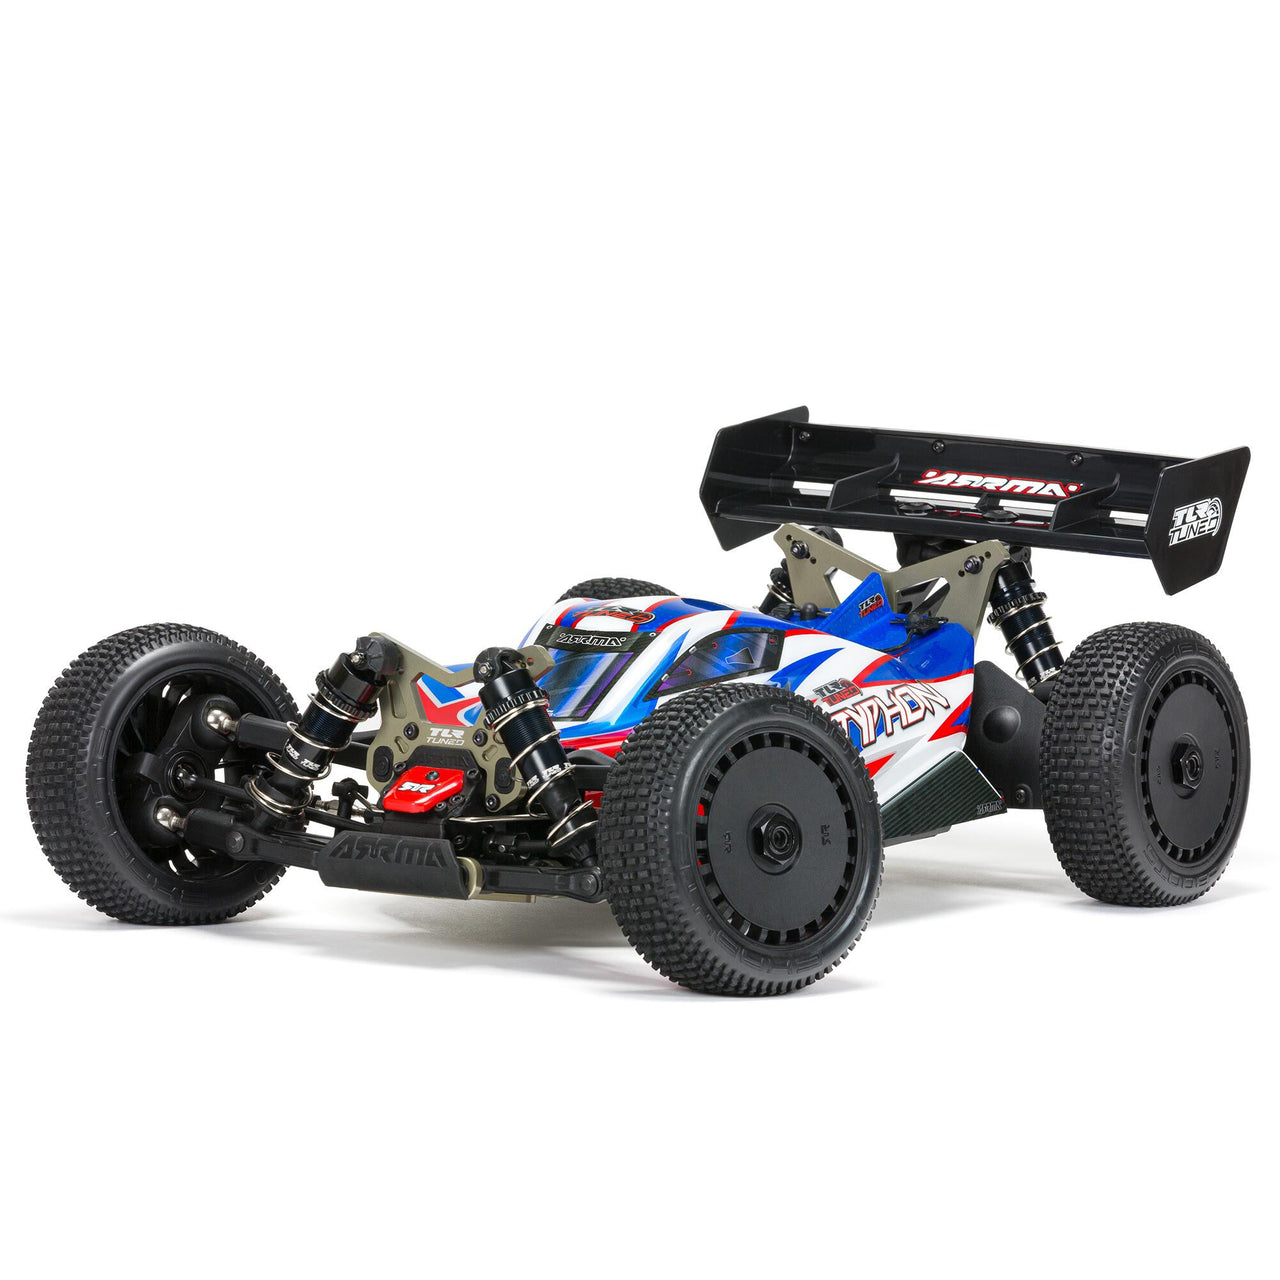 ARA8406 1/8 TLR Tuned TYPHON 6S 4WD BLX Buggy RTR, rouge/bleu